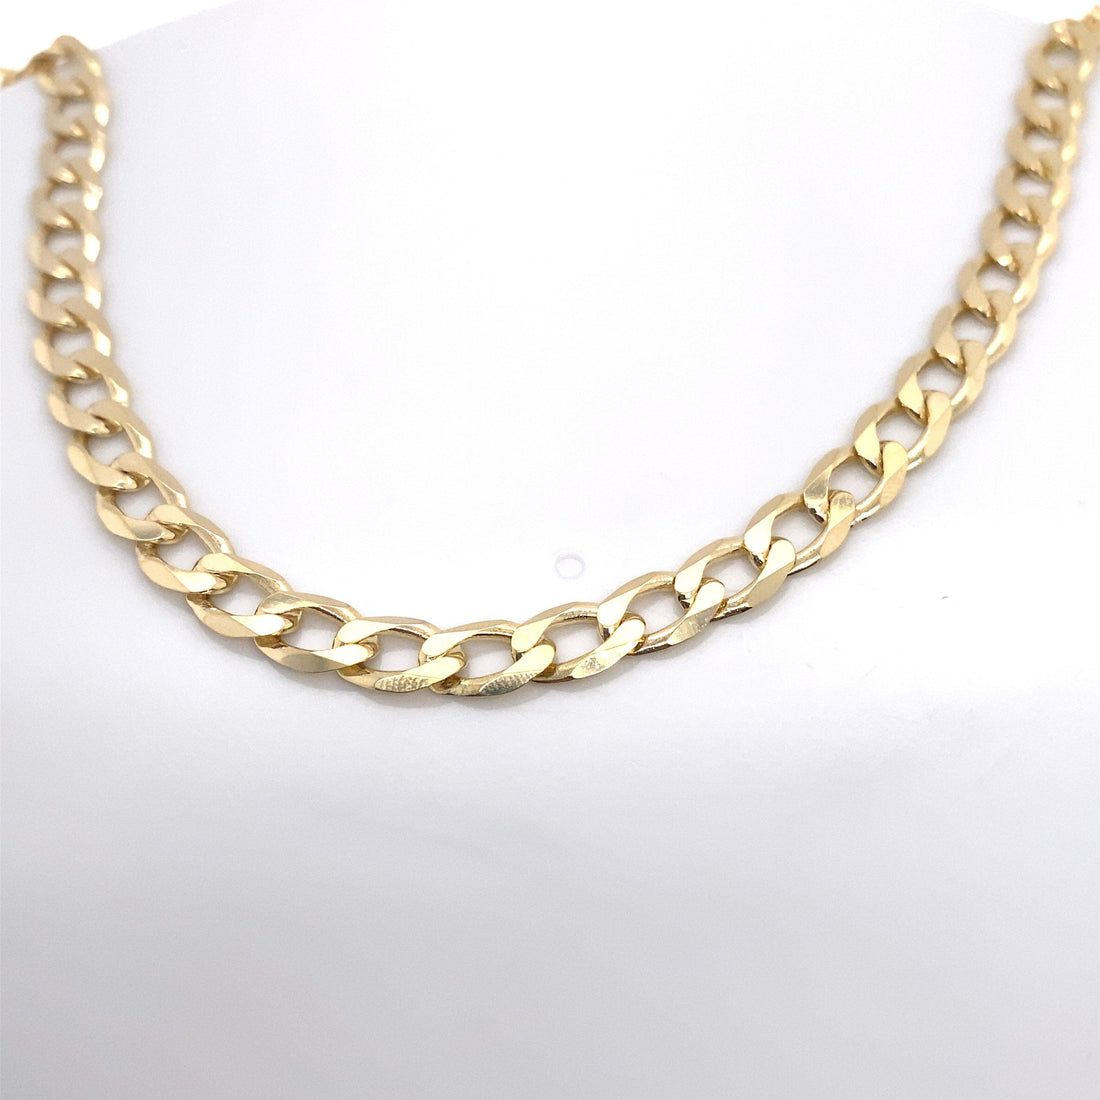 10K YELLOW GOLD CONCAVE CURB HEAVY CHAIN - Appelt&